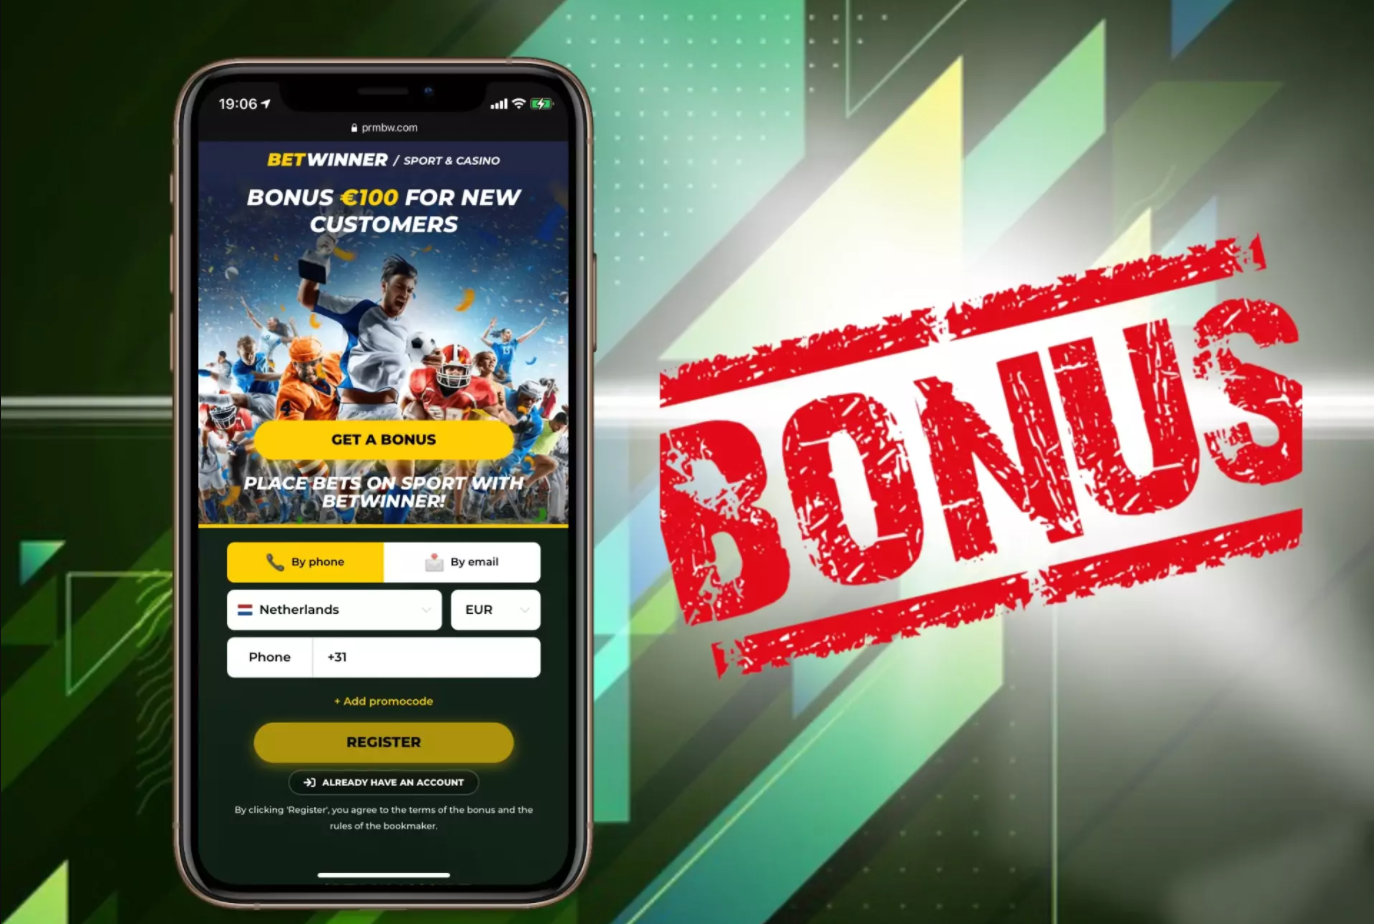 3 Kinds Of betwinner iphone: Which One Will Make The Most Money?